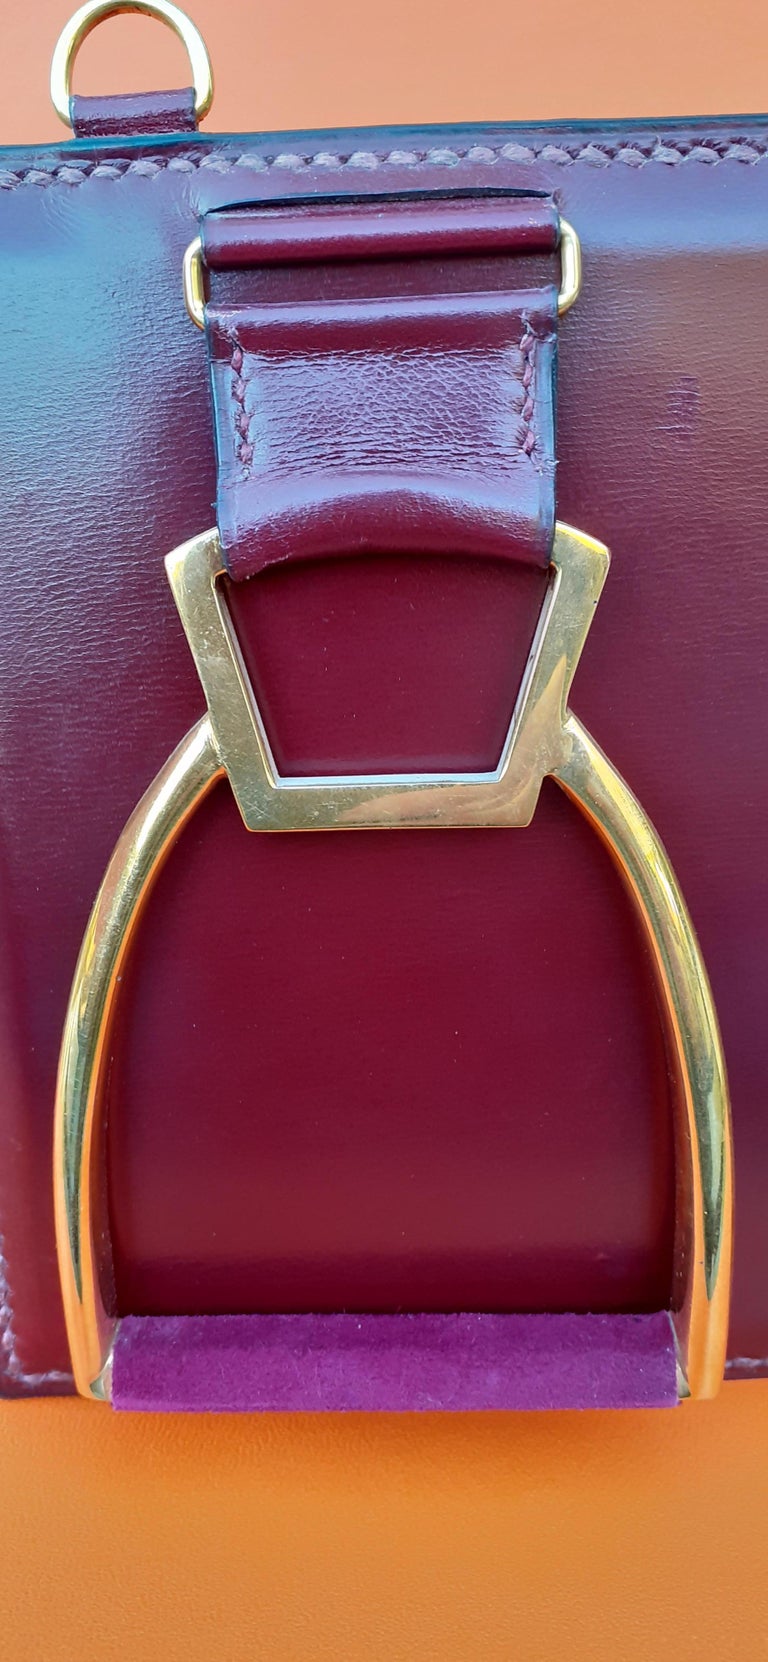 Exceptional Hermès Tie Hanger Tie Rack 3 Stirrups in Metal and Leather For Sale 5